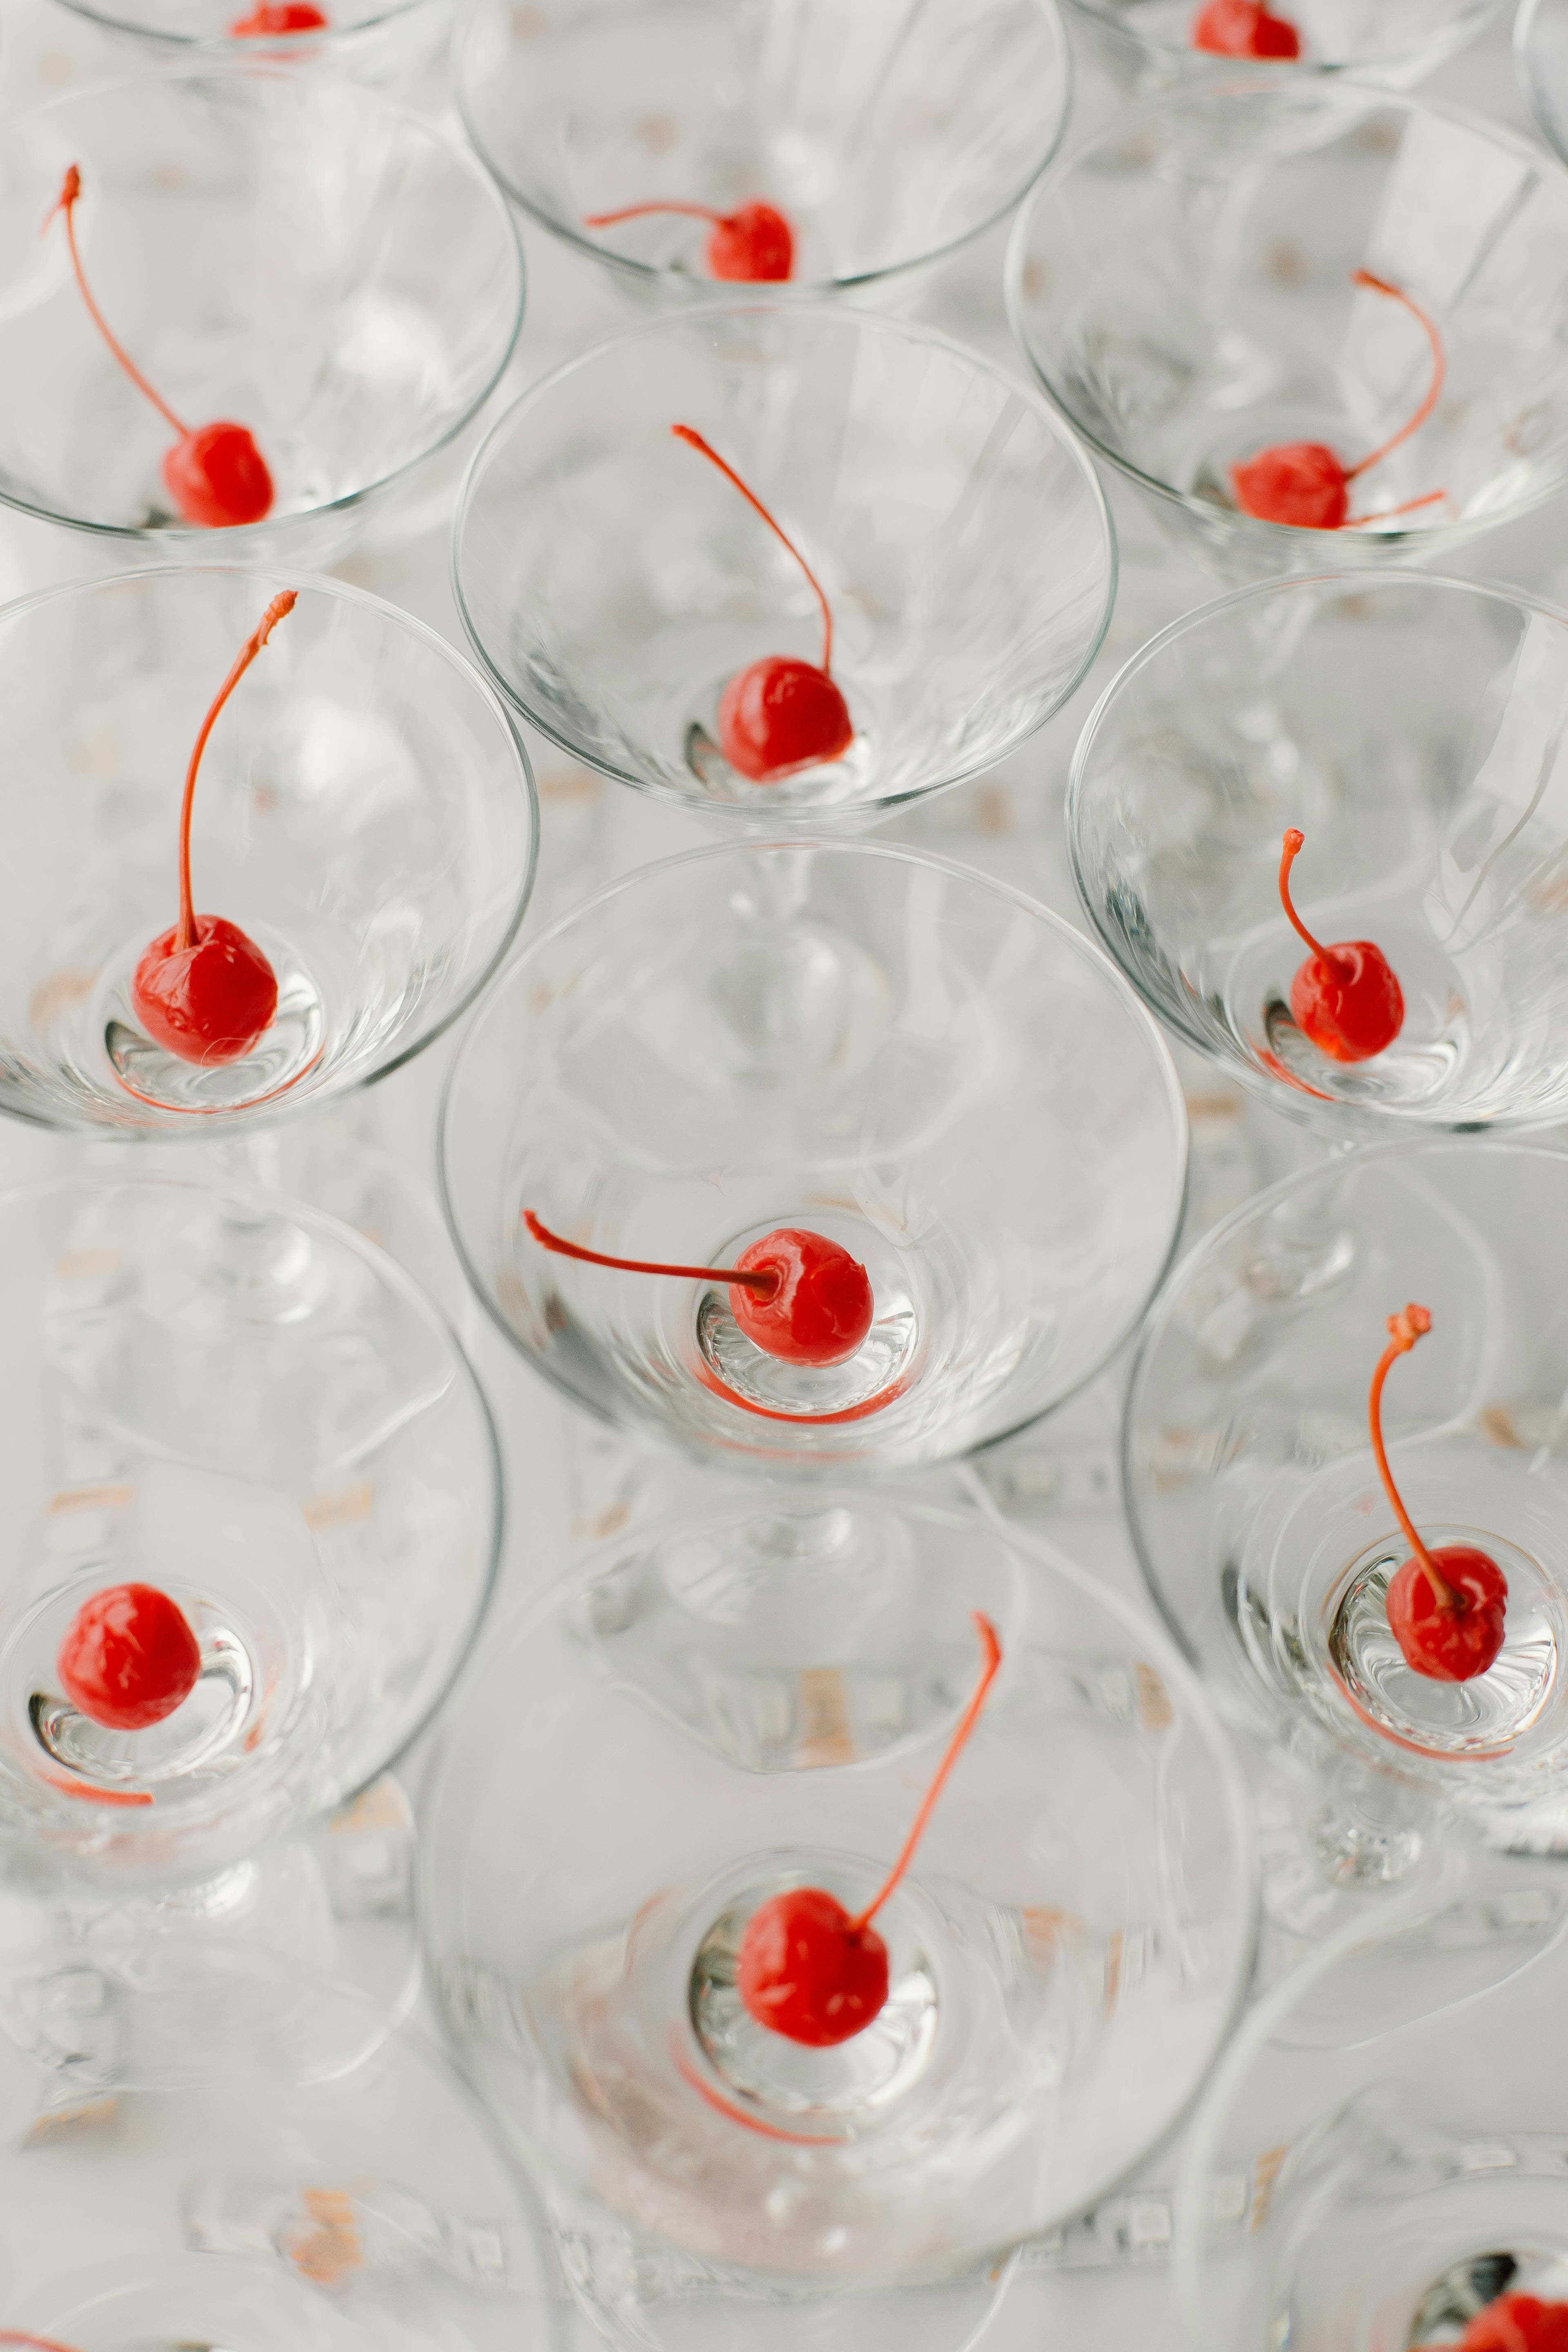 Five Easy Cherry-Based Cocktails That Are A Cherry-On-Top This Summer!